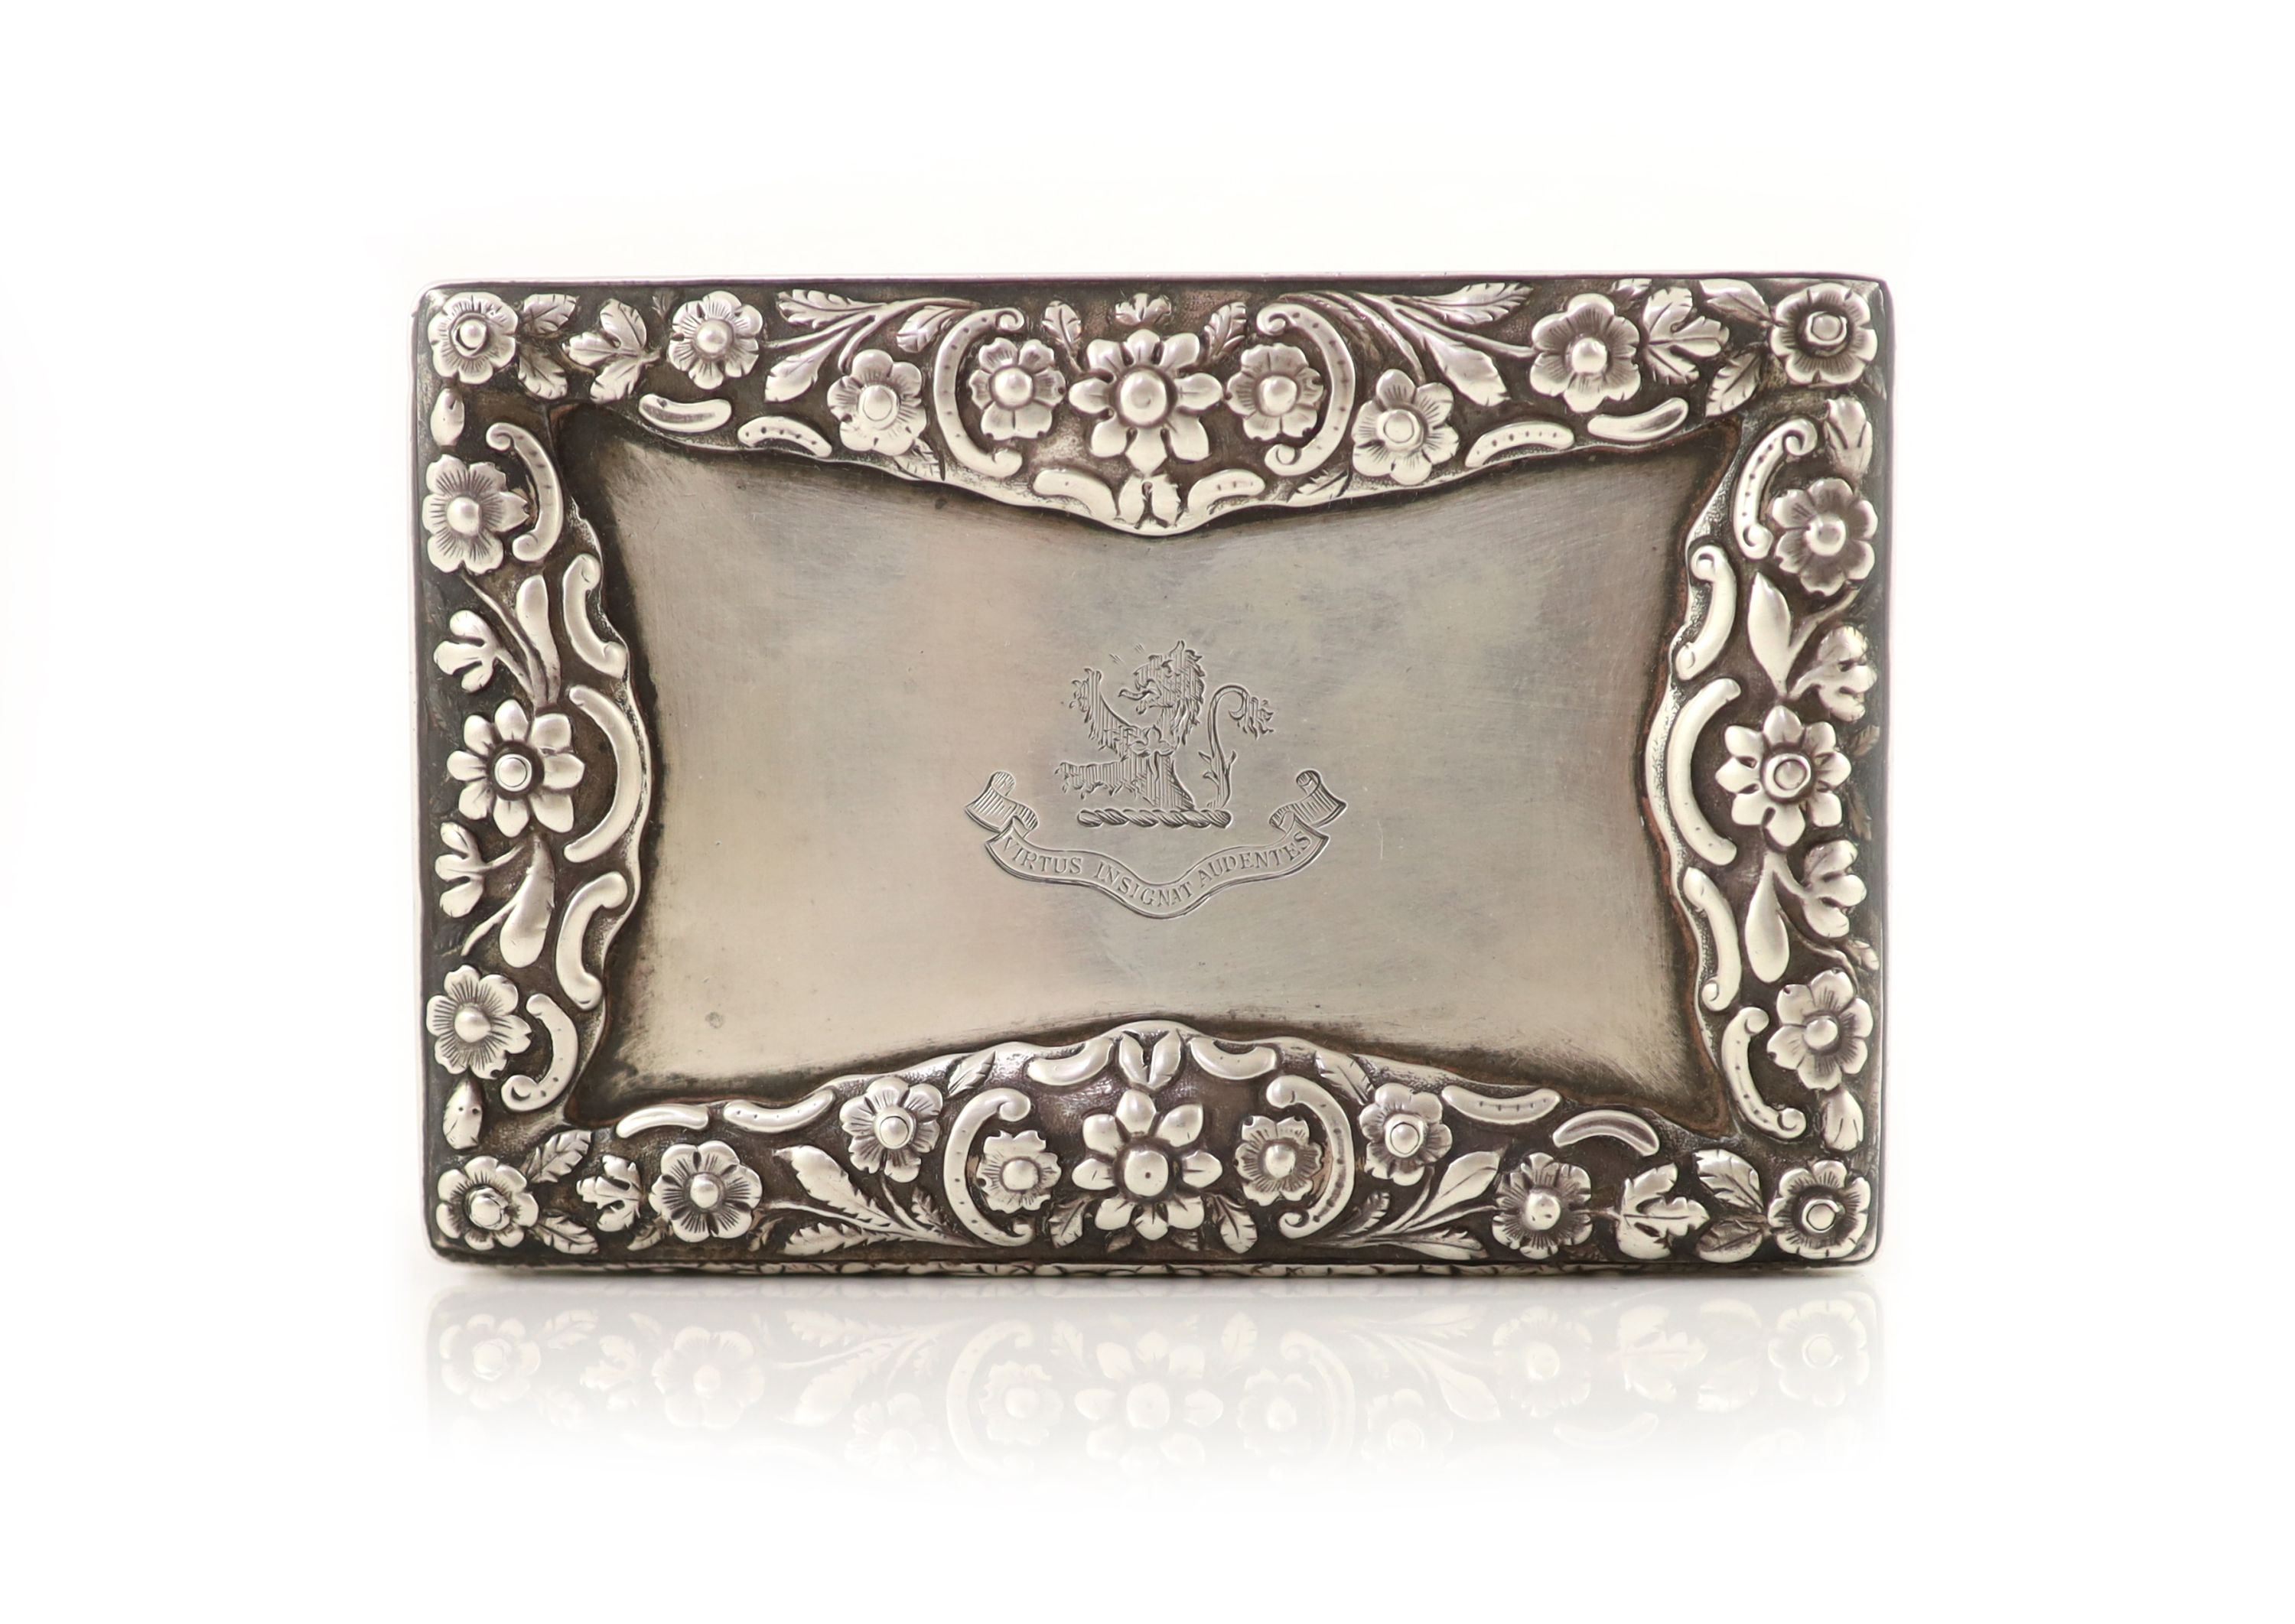 An early Victorian silver table snuff box, by Nathaniel Mills